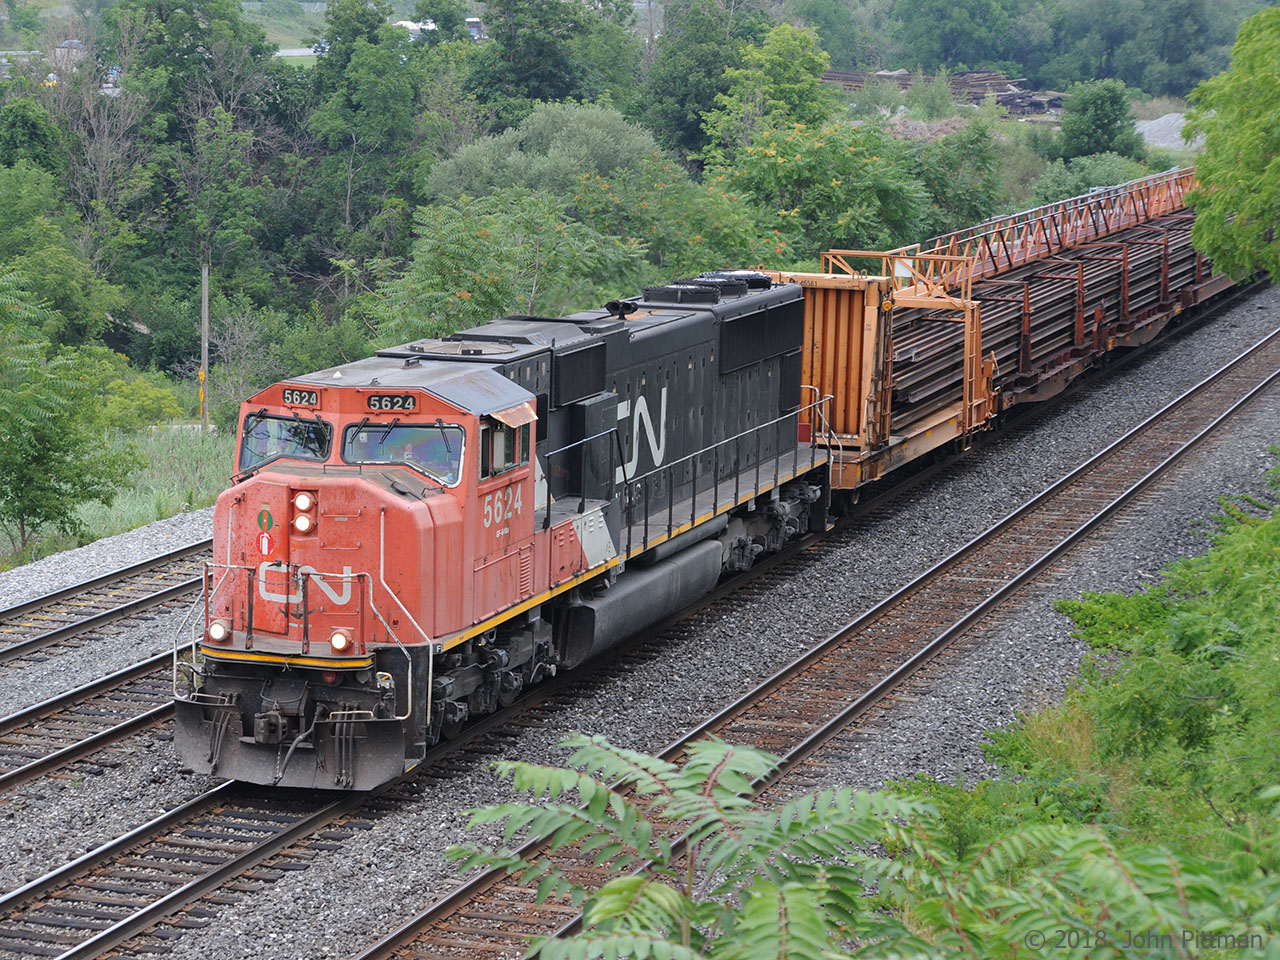 Continuous welded rail train powered by SD70i CN 5624 heads west on the Oakville Sub toward CN Snake.  The bulkhead rail carrier car behind the engine is CN 46561.